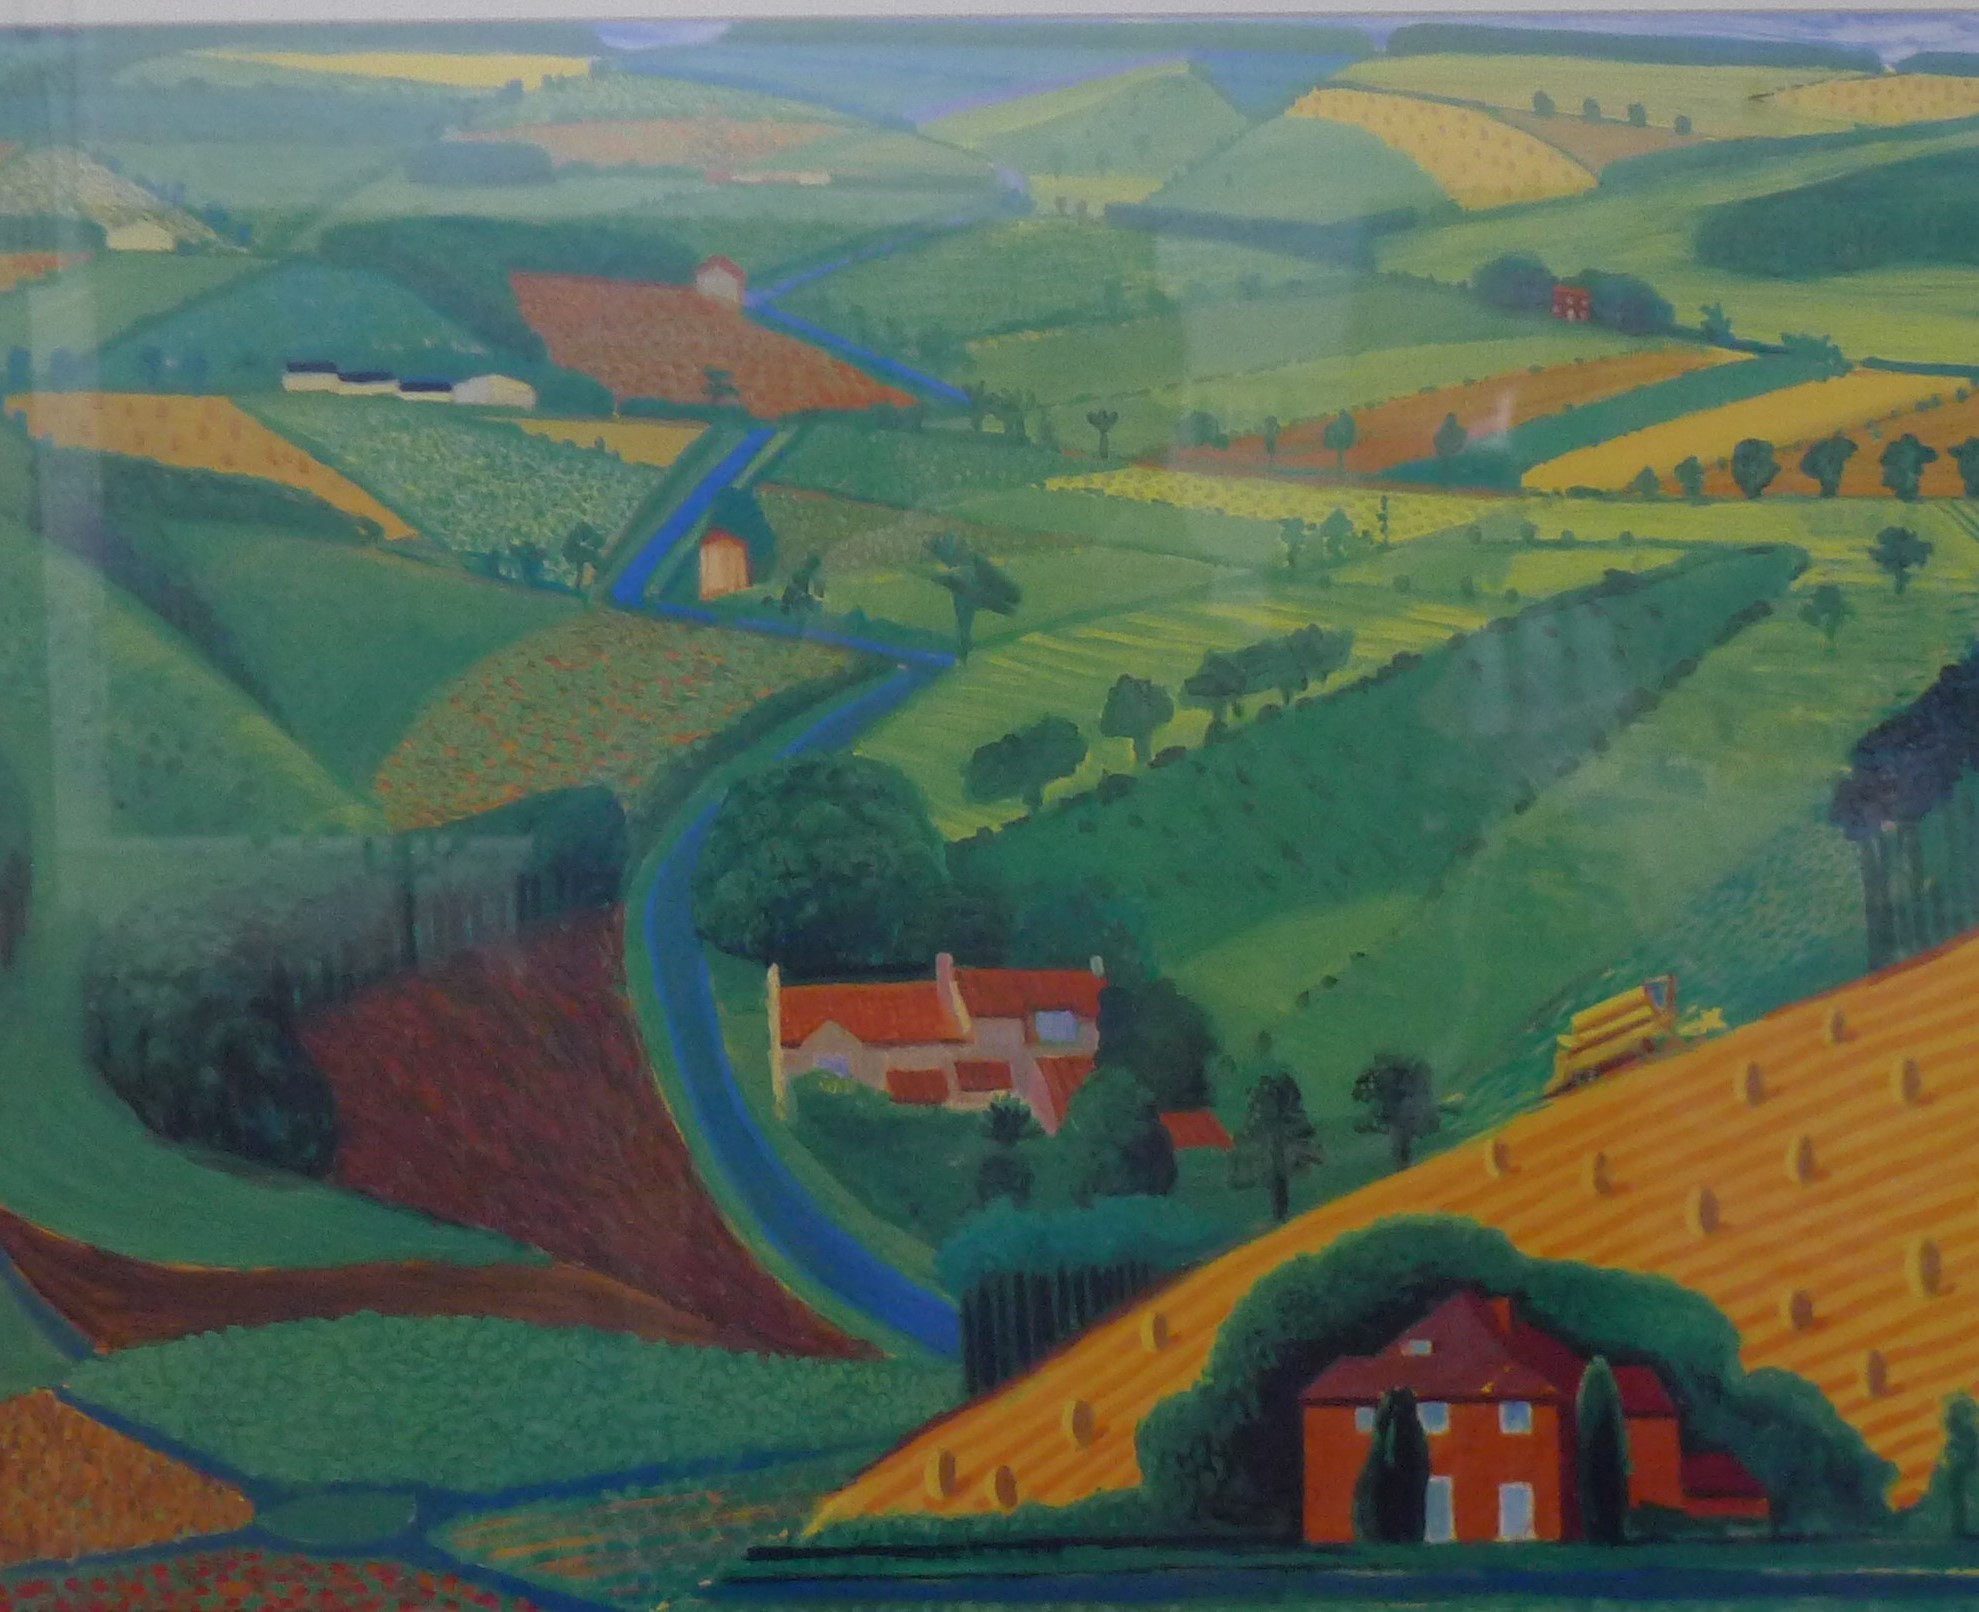 DAVID HOCKNEY, The Roads Across the Wolds, print, framed and glazed. 60 x 48 cm.